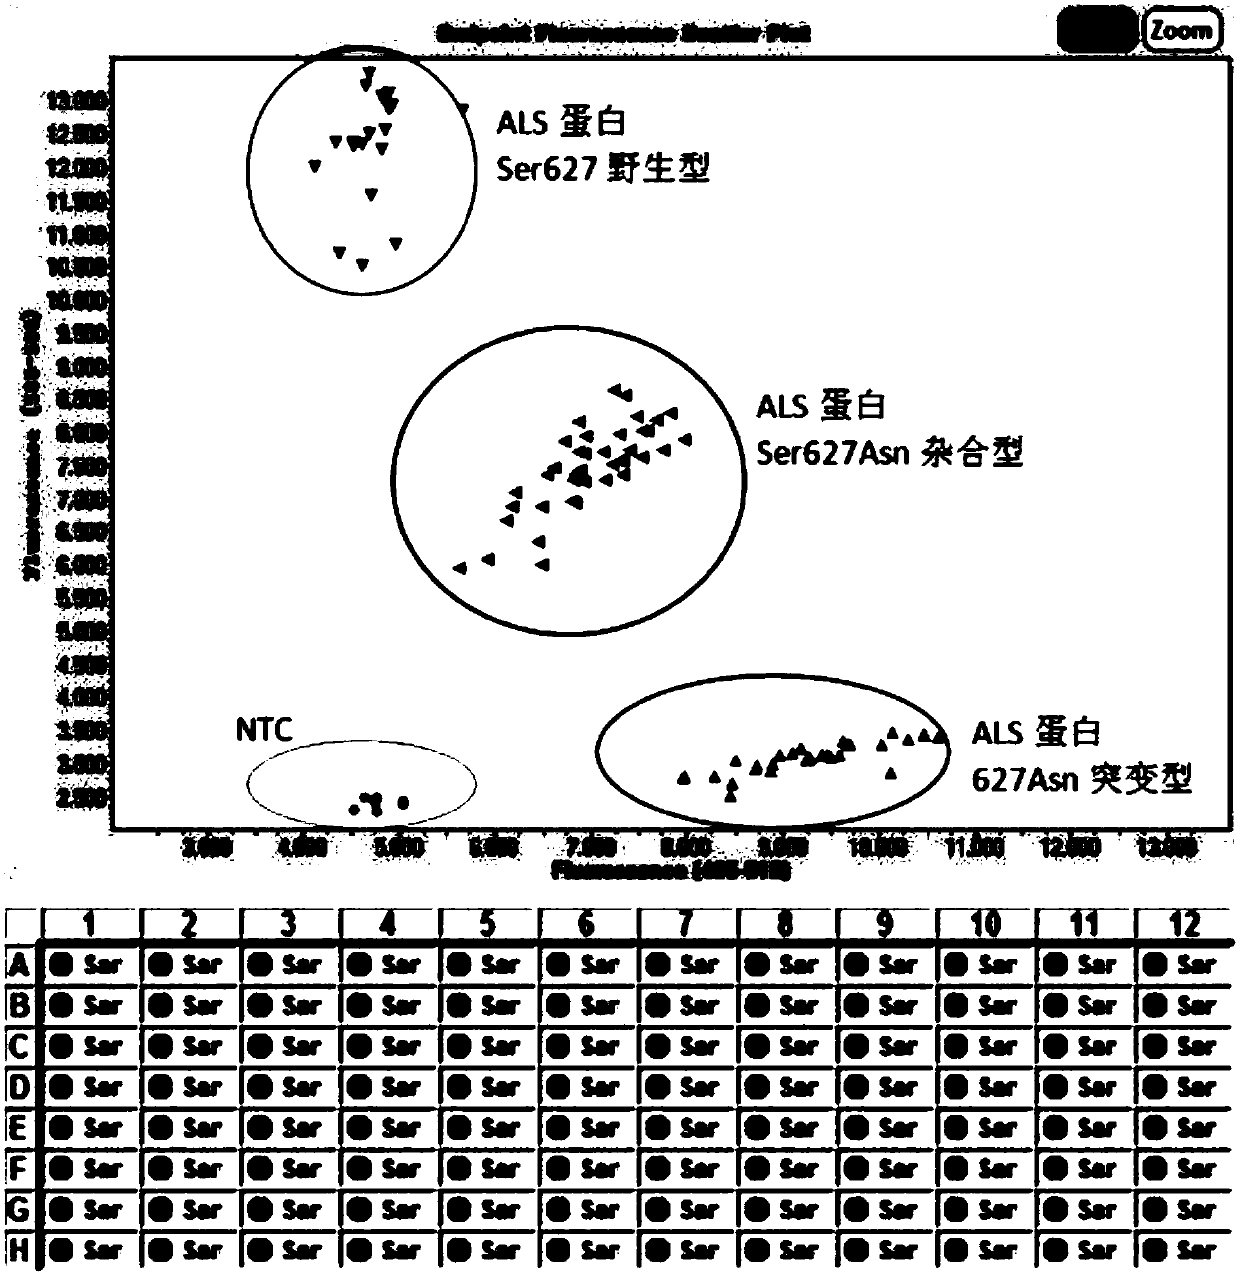 KASP marker primers for detecting SNP mutations in rice ALS genes and application thereof